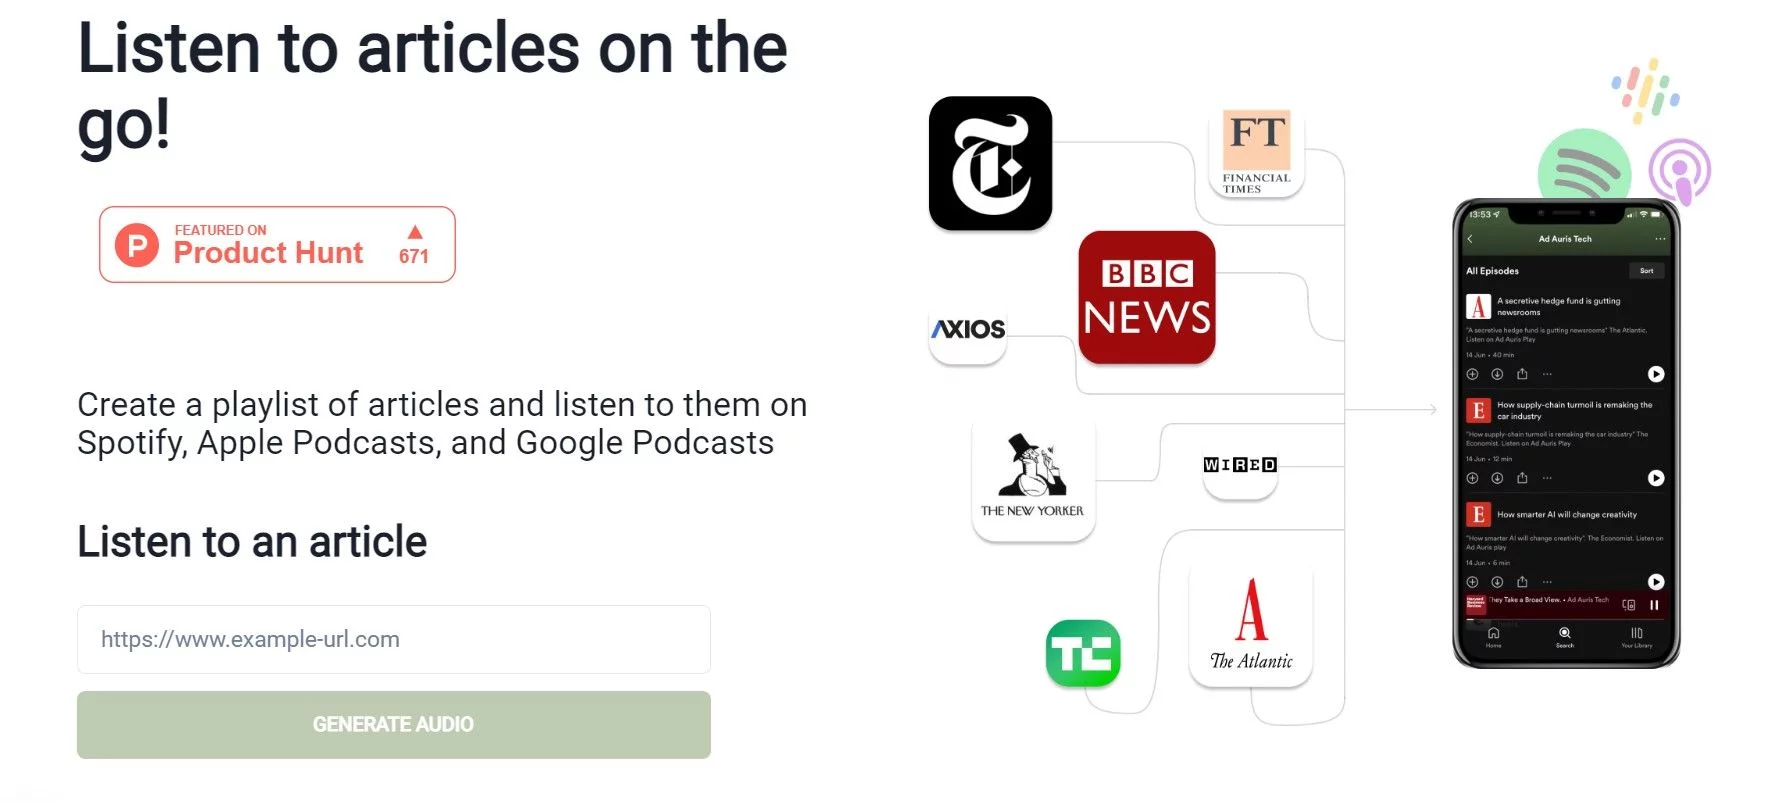  Listen to articles on the go with Spotify, Apple